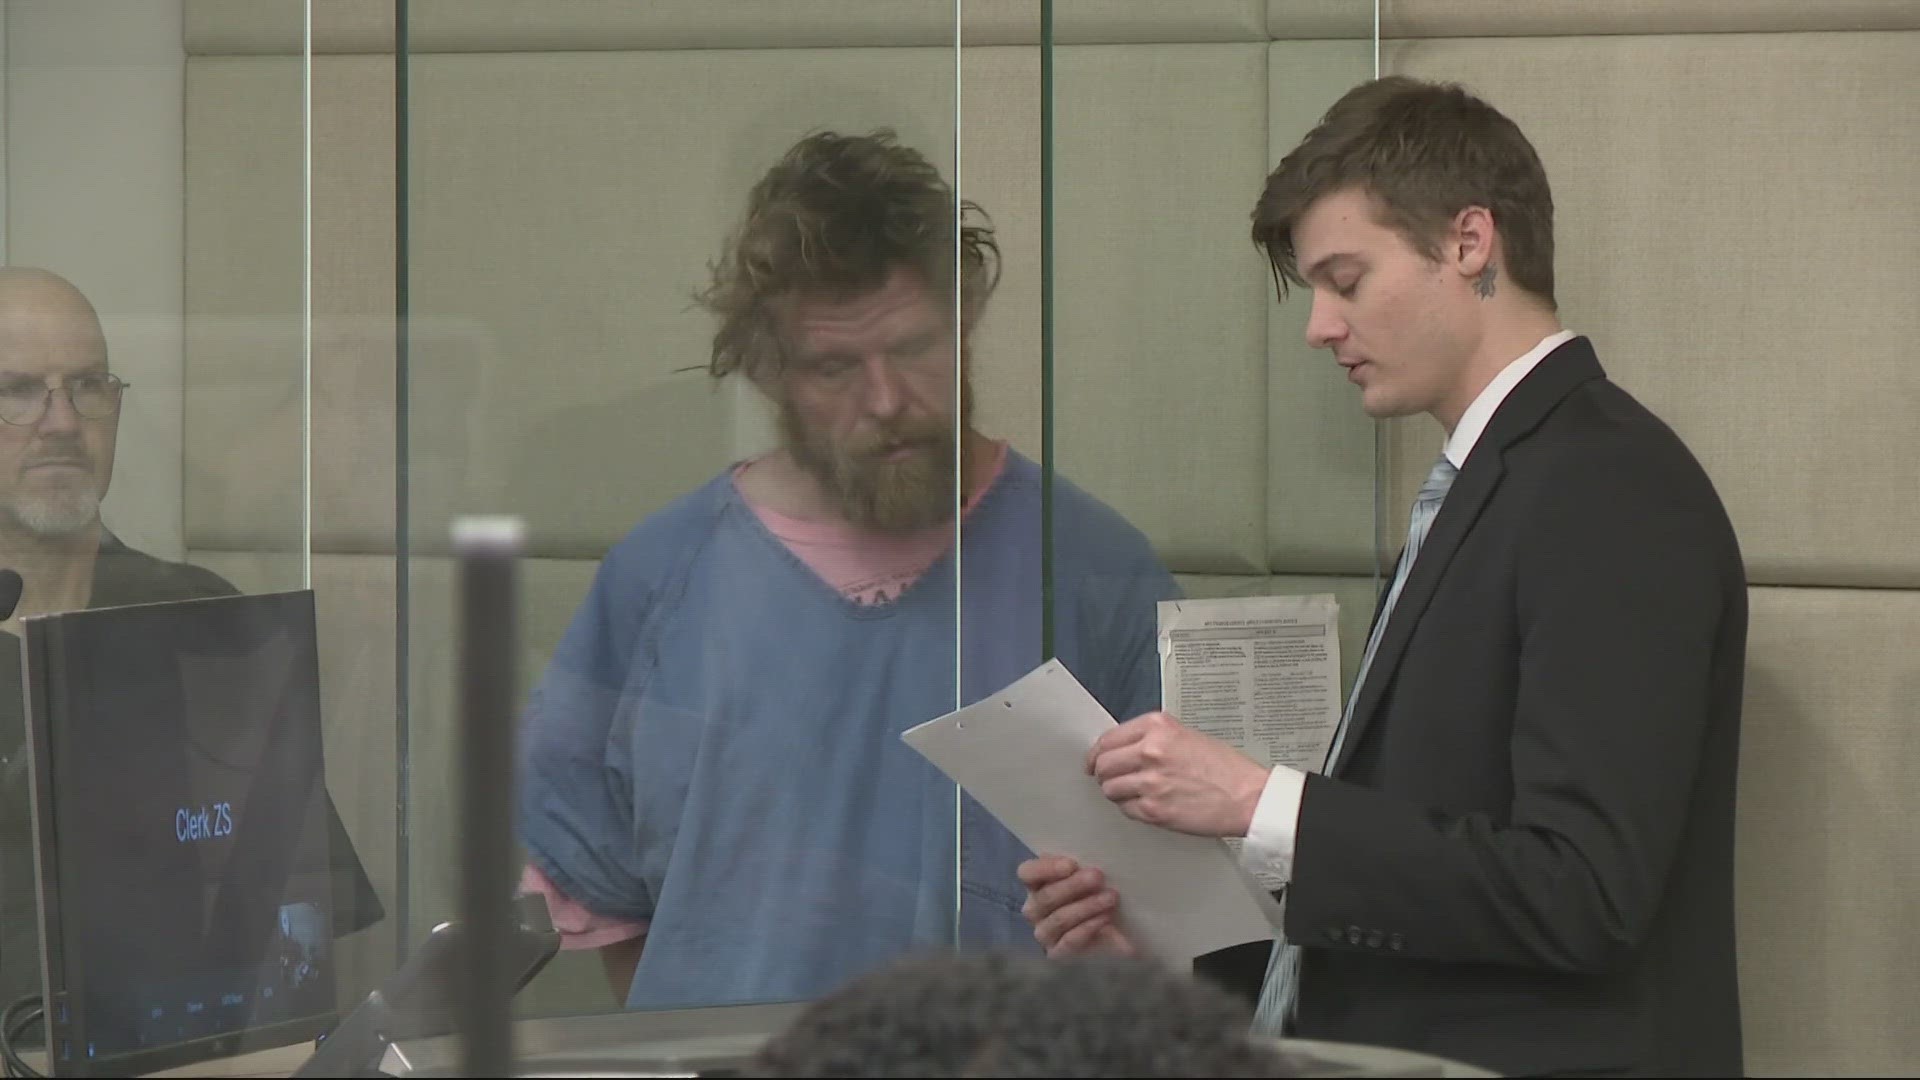 A man accused of yelling slurs while biting and stabbing a man with scissors in Portland’s Old Town pled not guilty in court on Feb. 21.